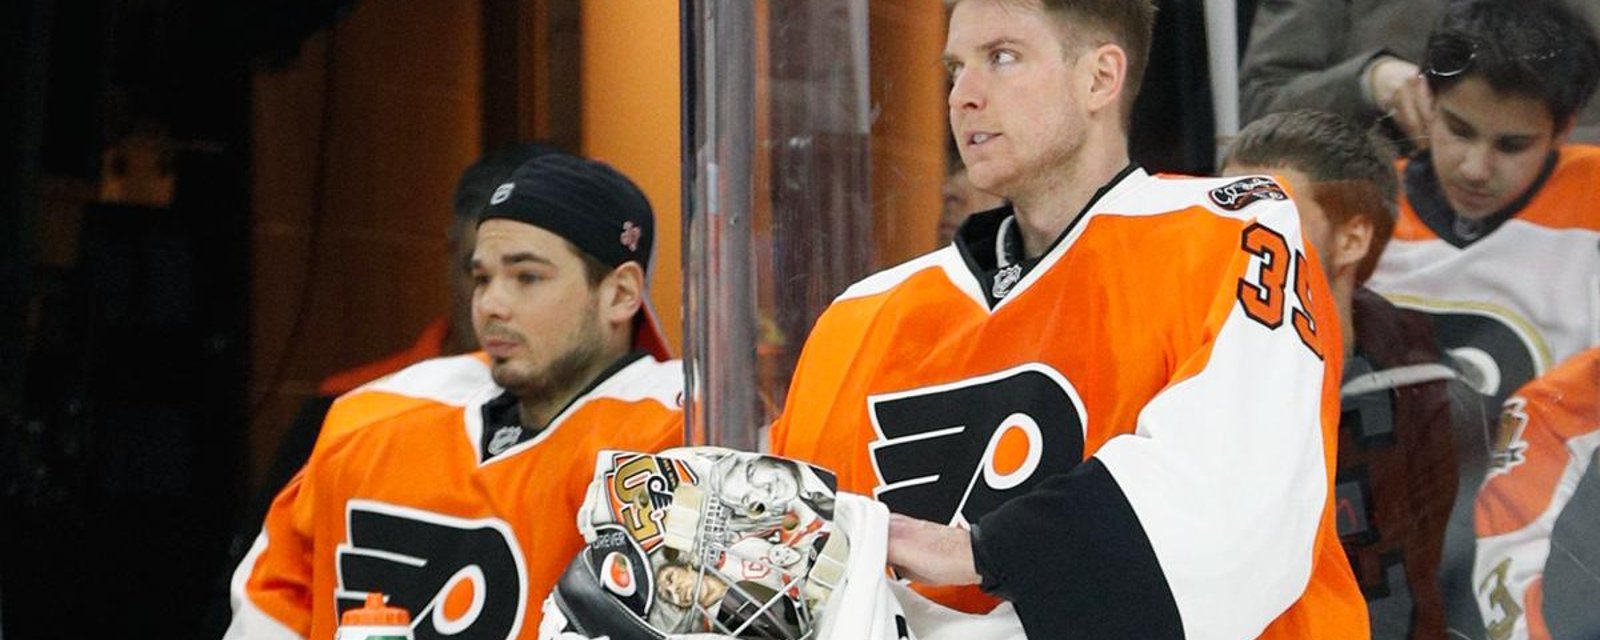 Ron Hextall makes lukewarm comments about own goalies. 